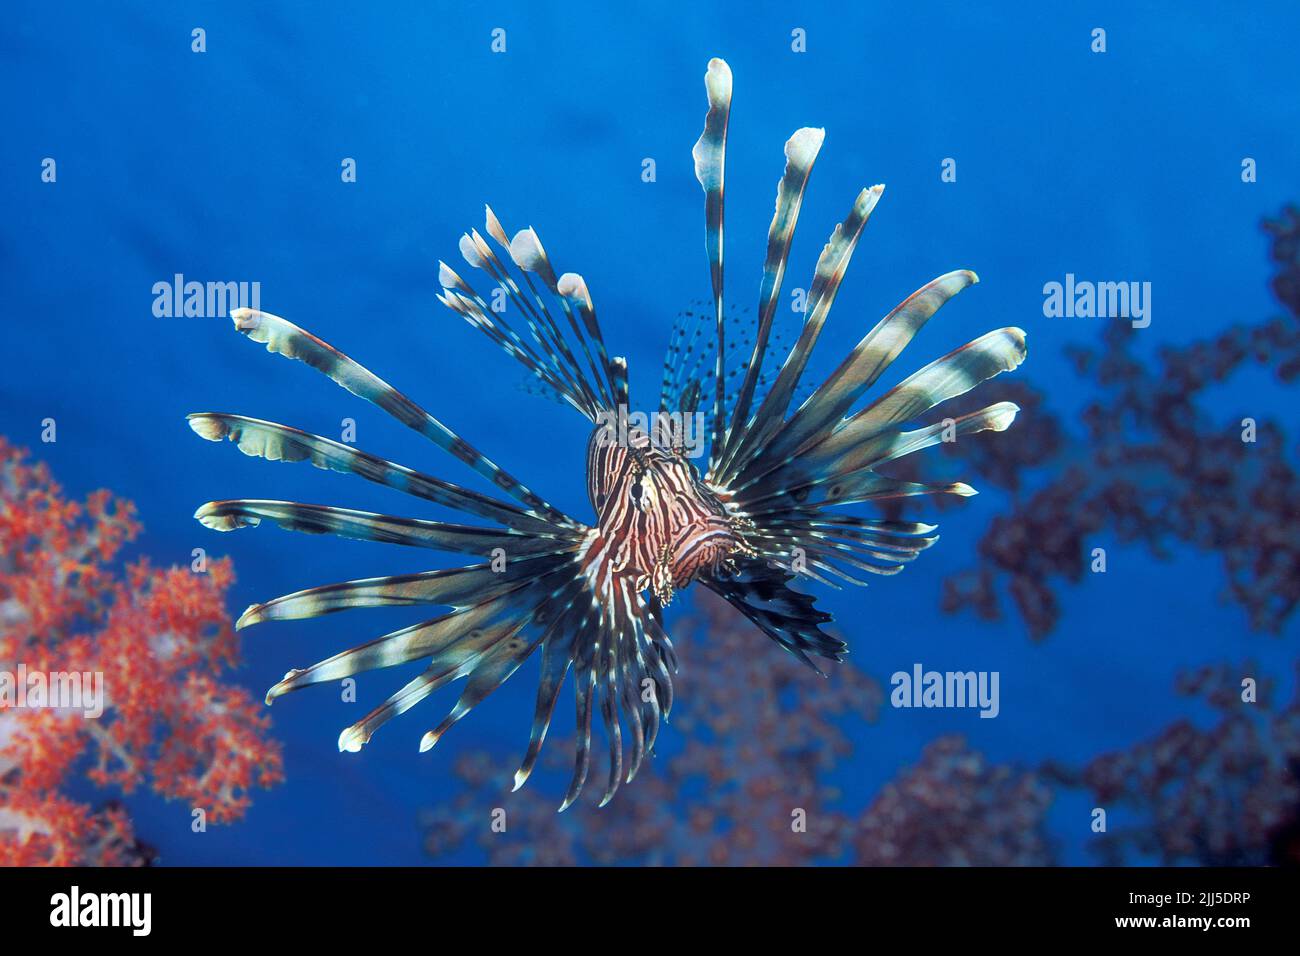 Common lionfish or Red Lionfish (Pterois volitans), spreading its fins in blue water, Andaman Sea, Thailand, Asia Stock Photo